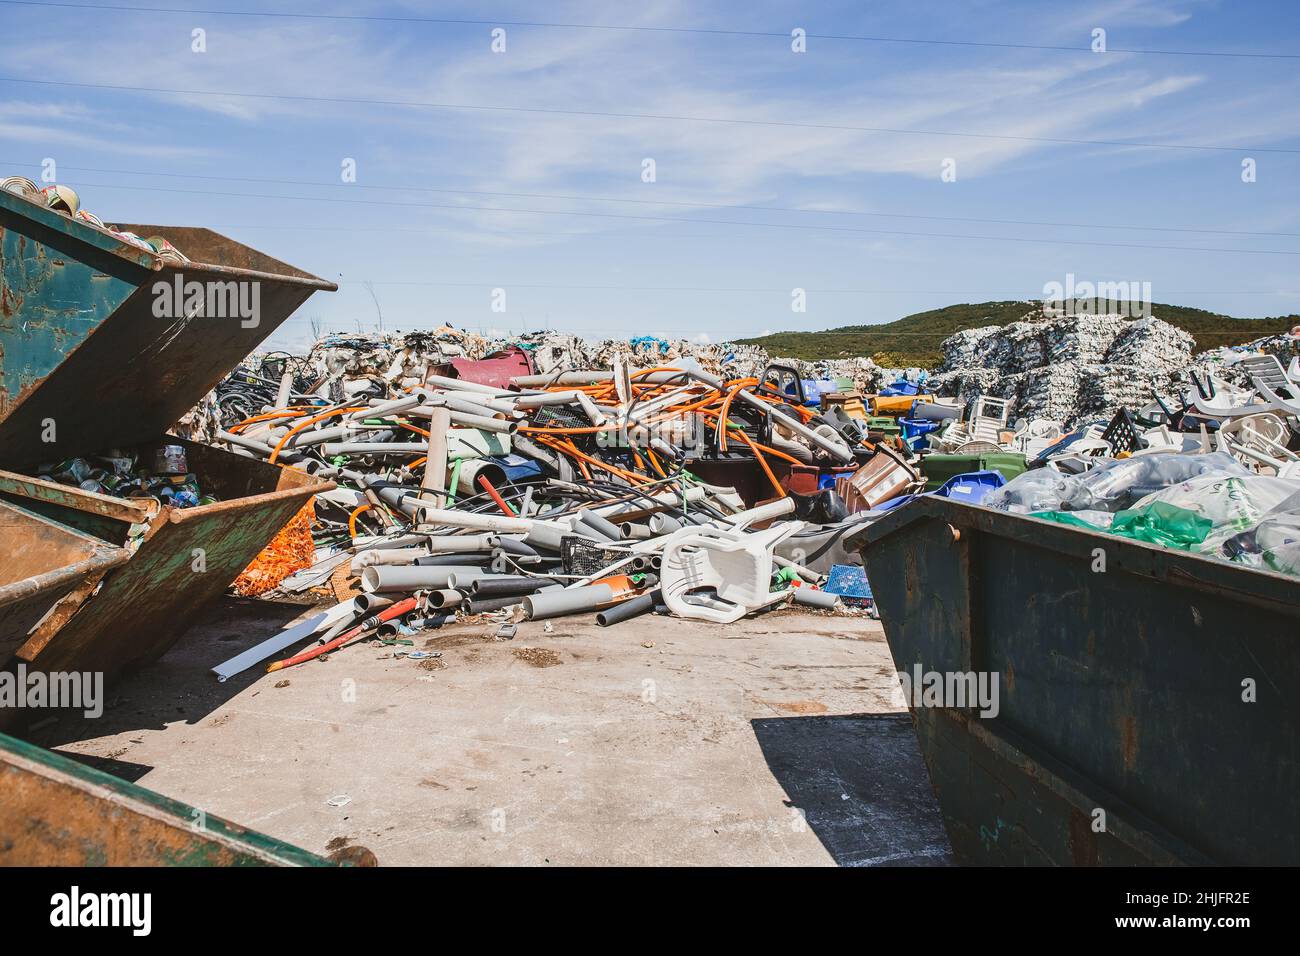 Krk, Croatia - 24 August, 2021: Waste collected at junkyard at waste recycling management centre on Krk island in Croatia Stock Photo